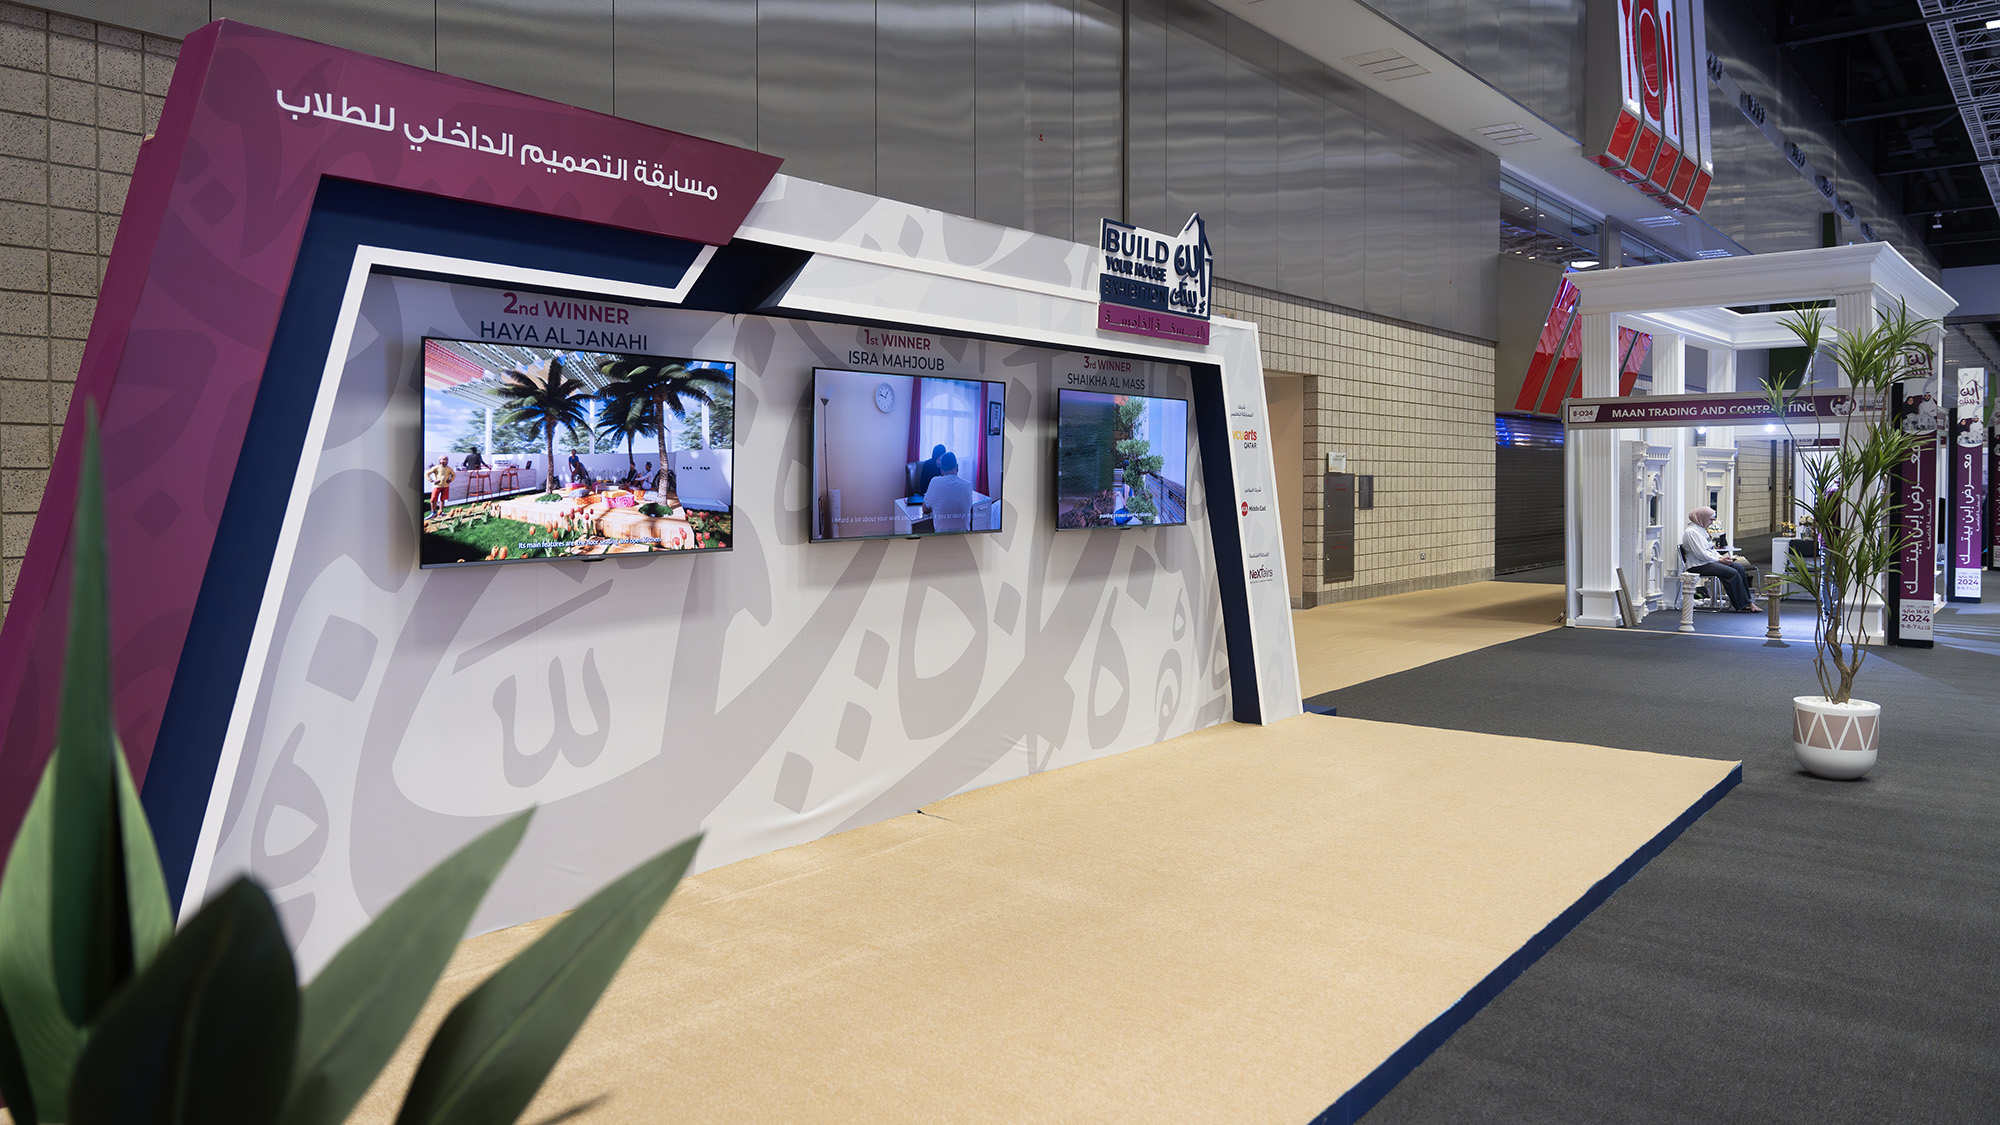 a stand at build your home with three screens showing the works of the V c u arts qatar winners